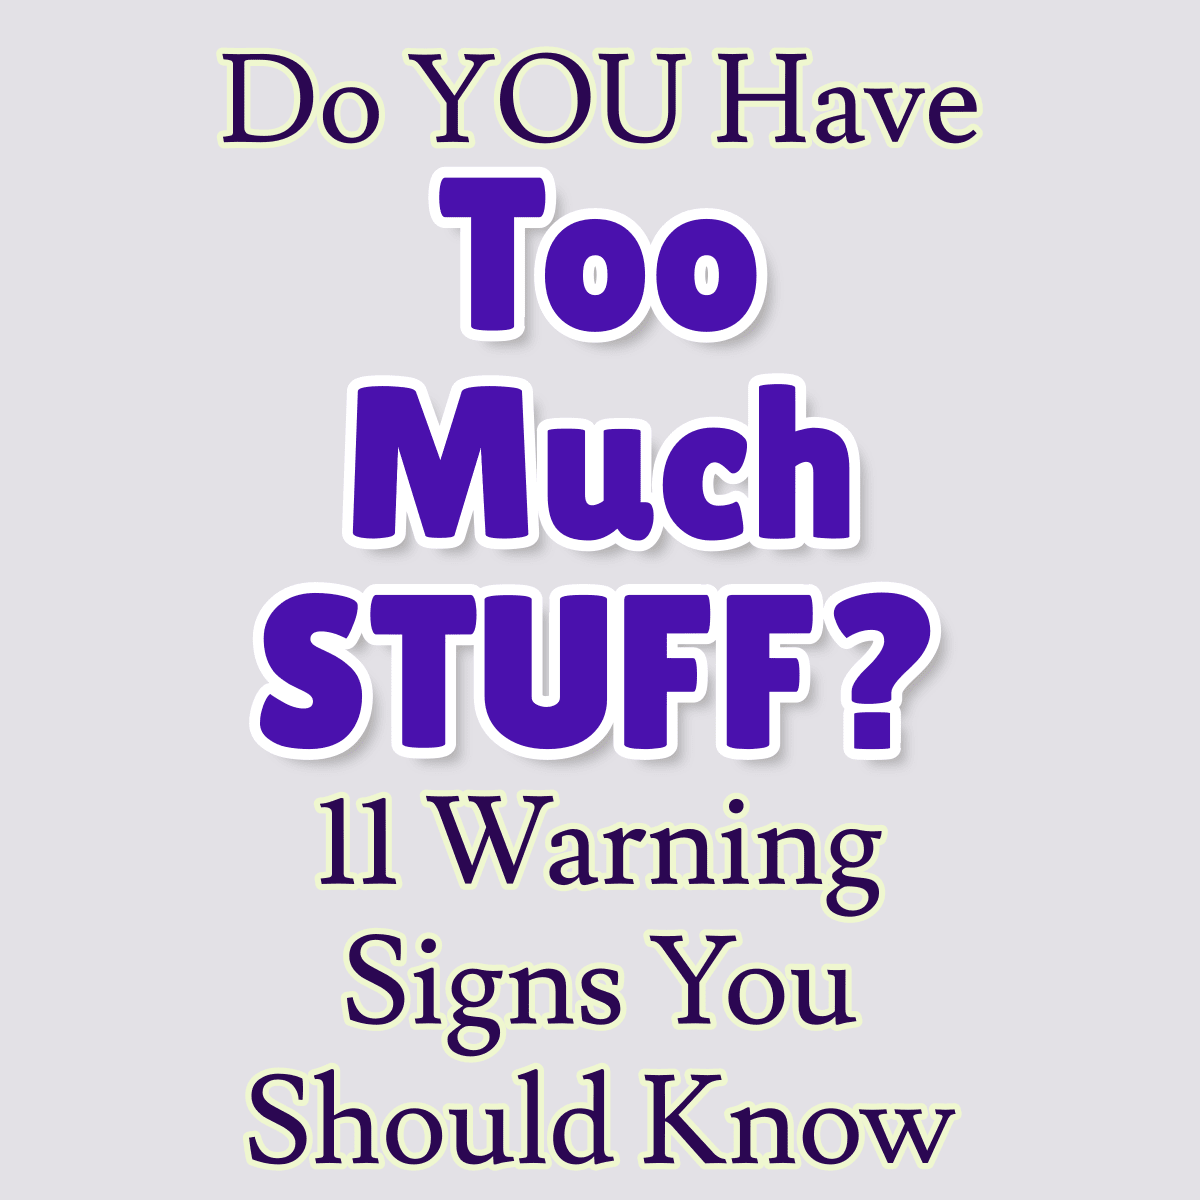 Do I have Too Much Stuff and Not Enough Space?Warning Signs you have too much stuff and how to get rid of it